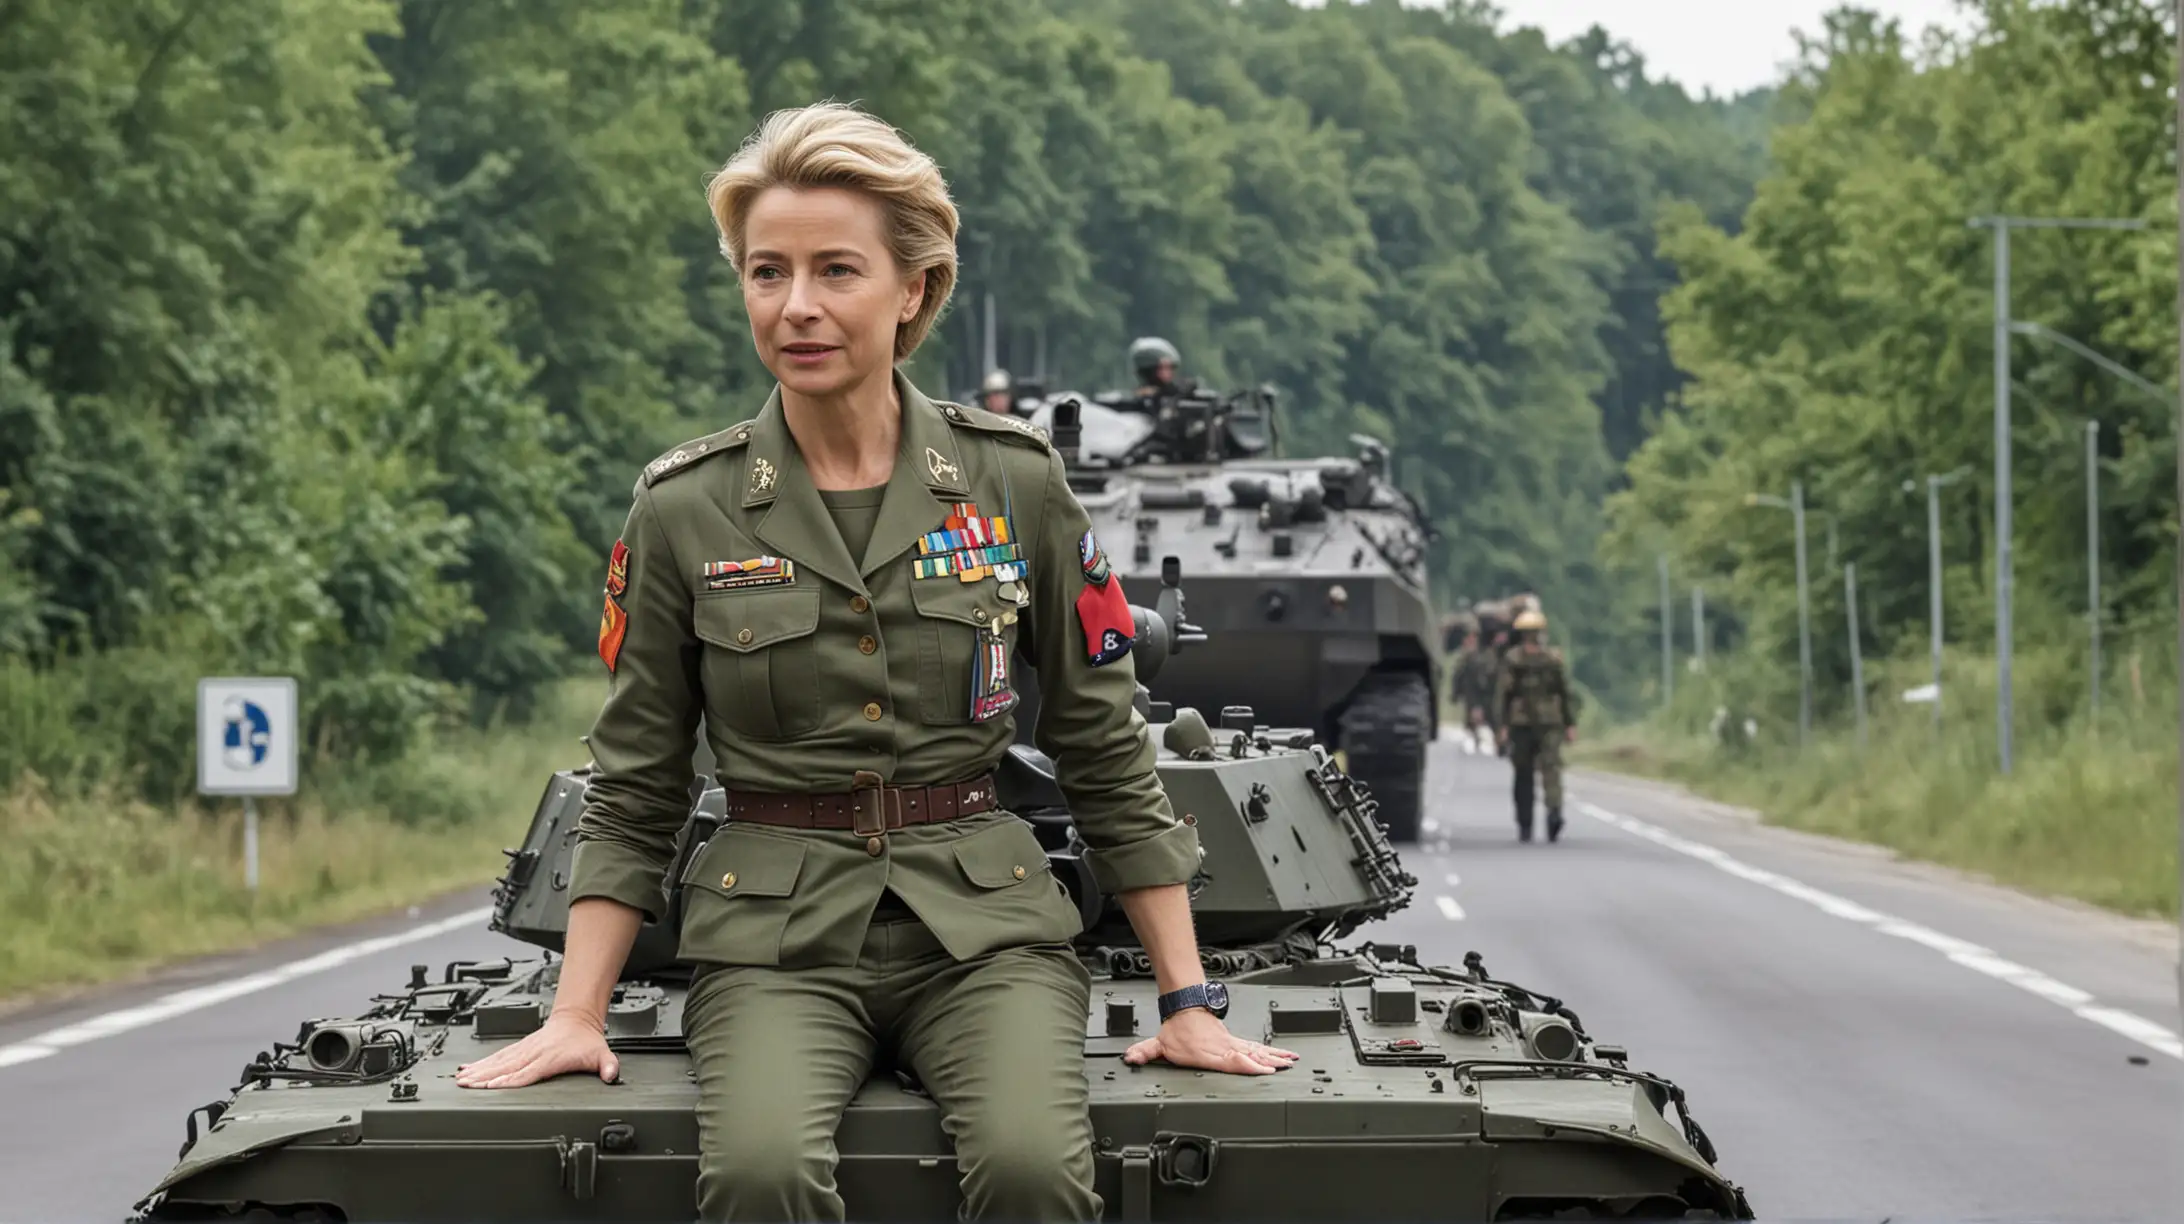 Ursula von der Leyen
dressed in a military uniform with a helmet on top of a tank on the road